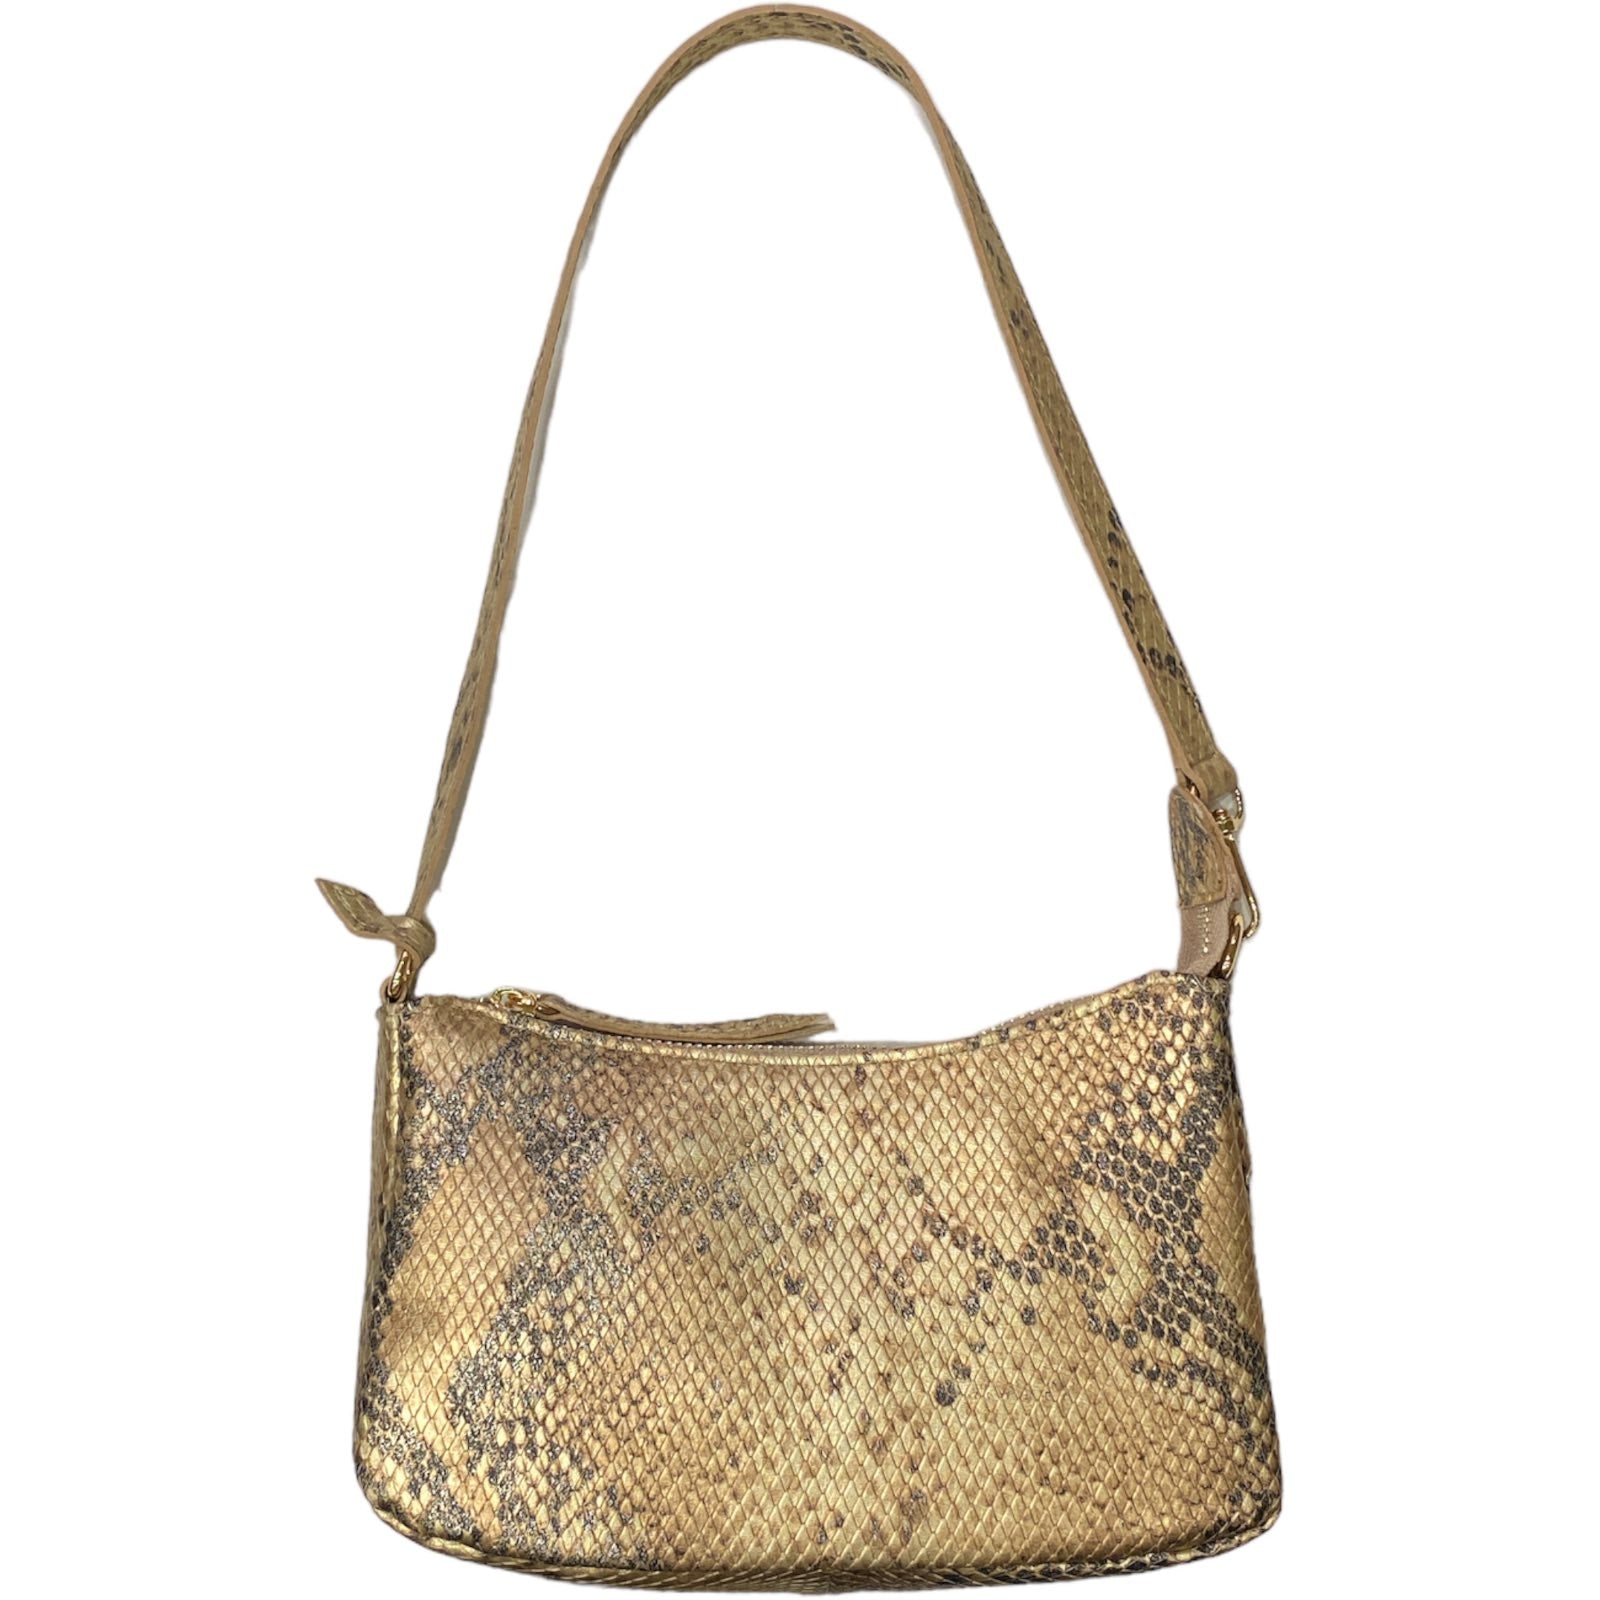 Natalie Small. Gold snake-print leather evening bag